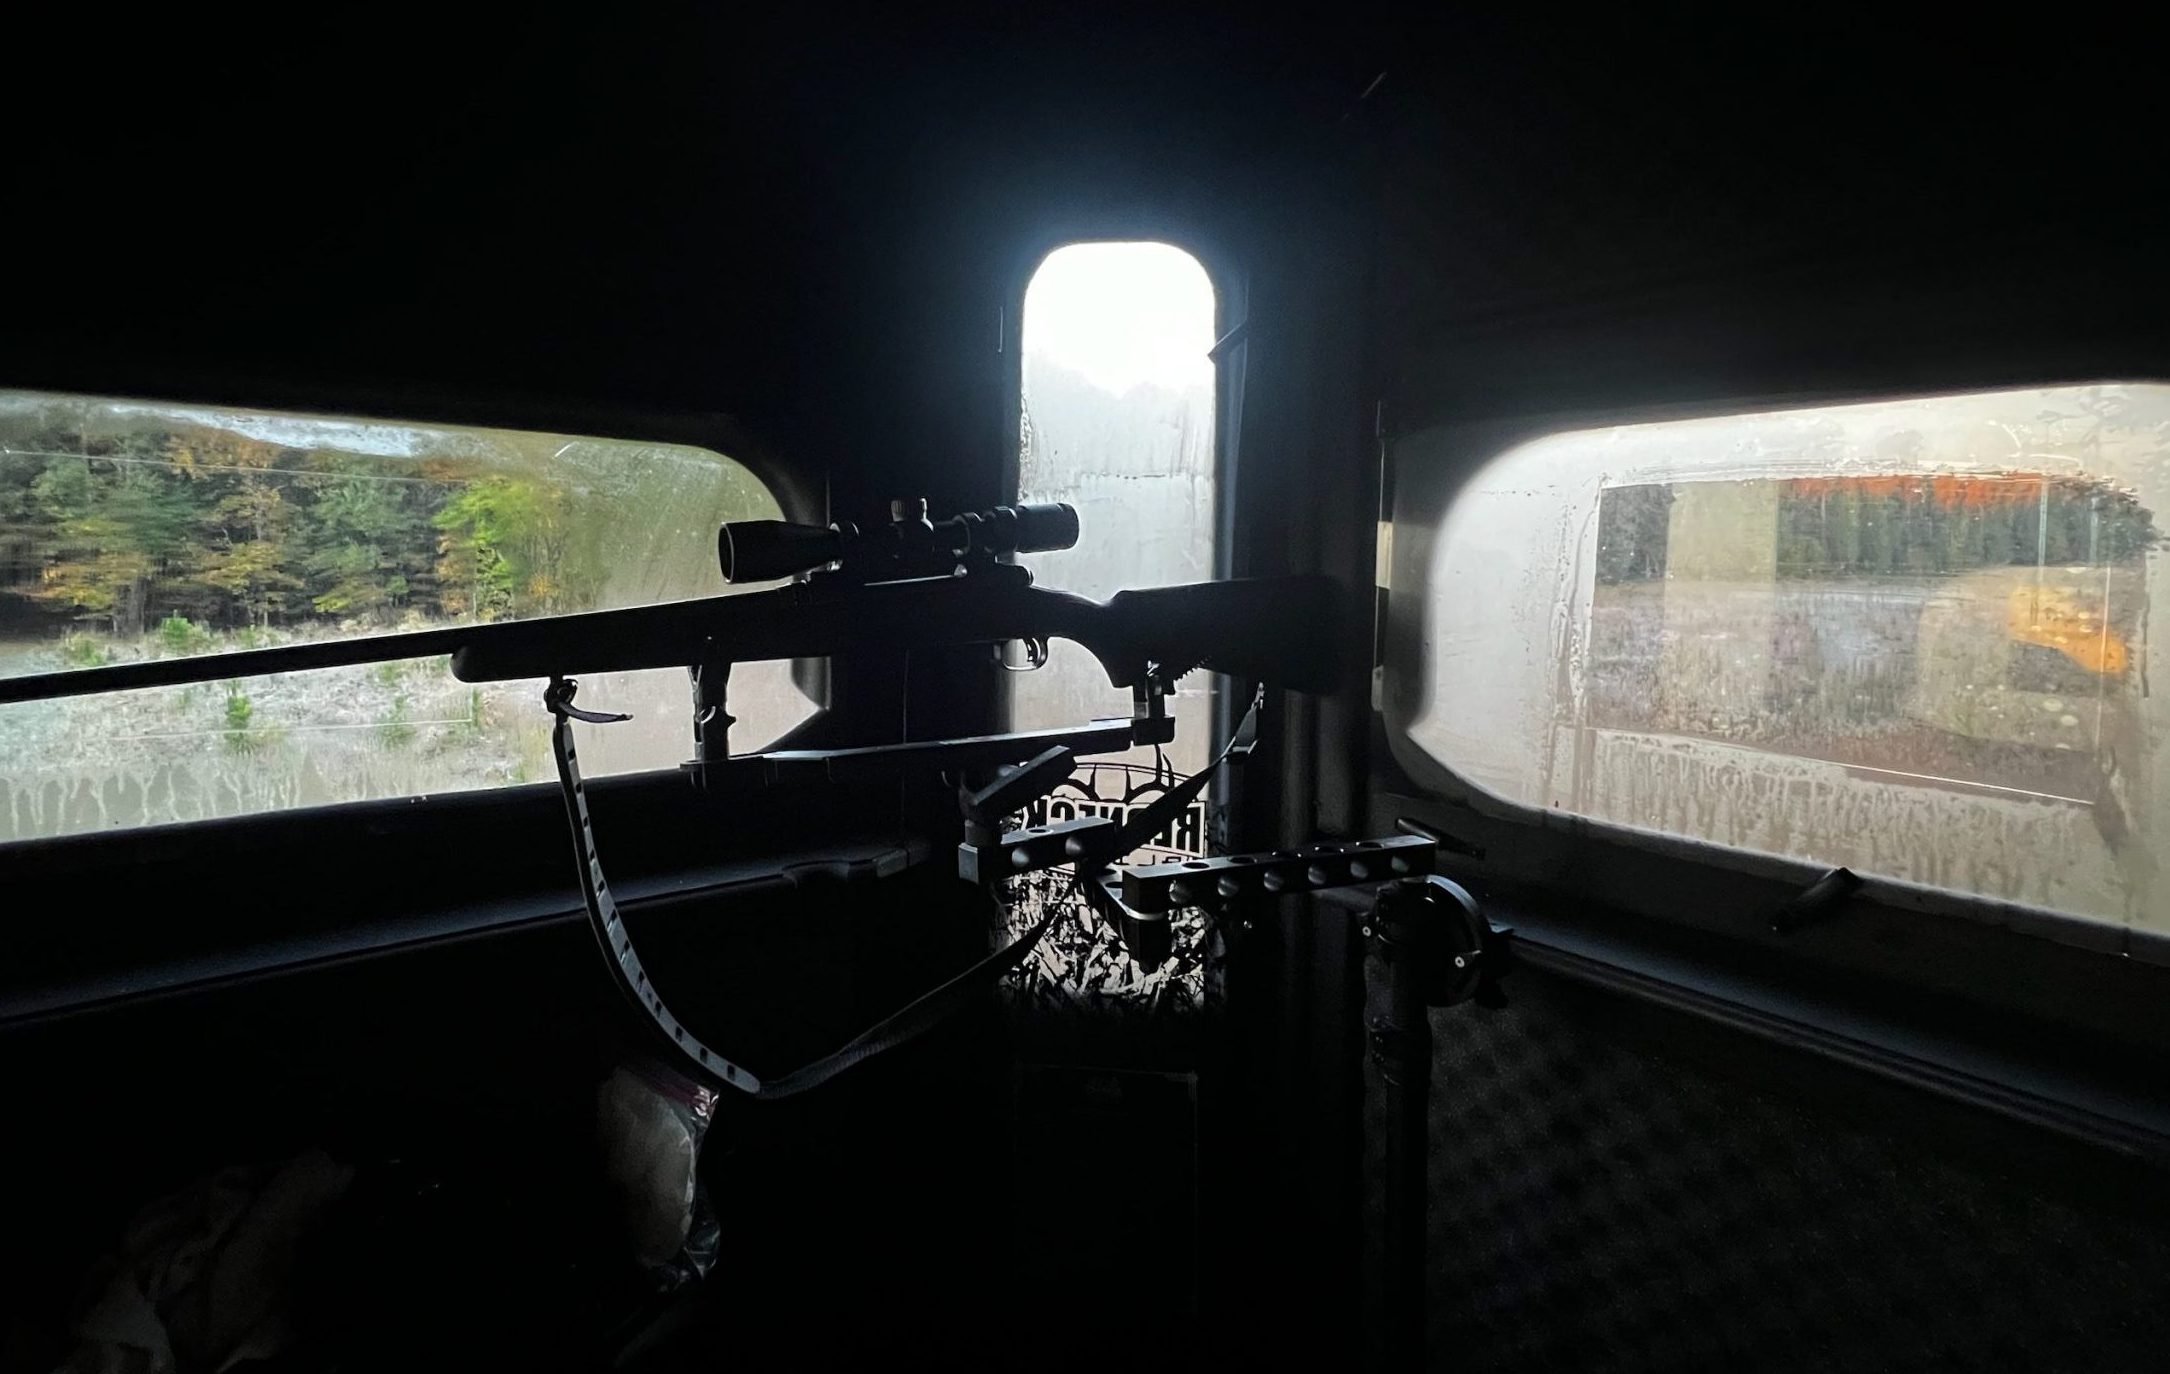 view from inside a deer blind with a rifle Hunter-Vision is applied to all the windows of the blind clearly showing the effectiveness of Hunter-Vision Preventing Fog on the windows.